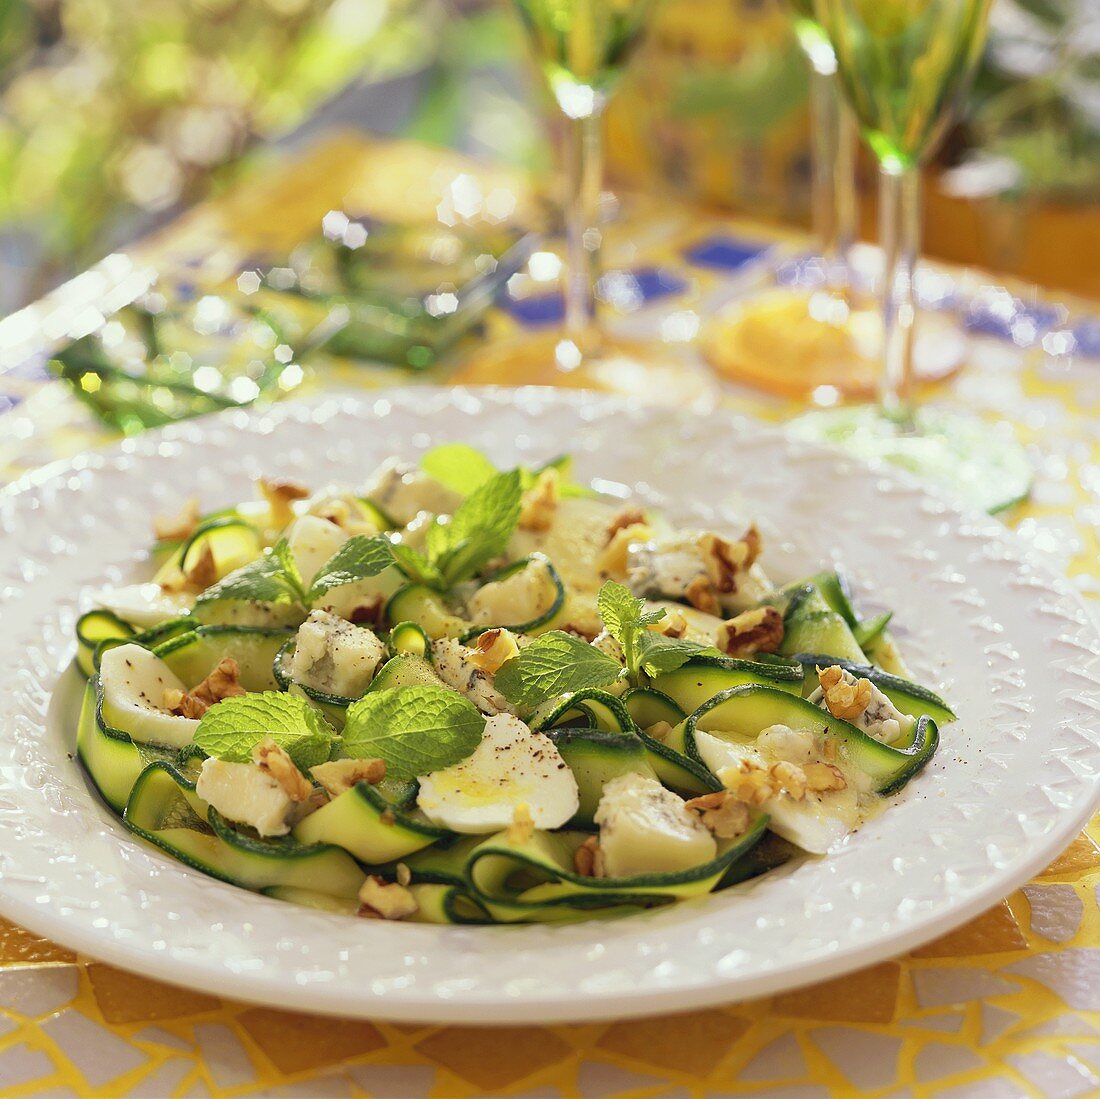 Courgette salad with mozzarella and mint